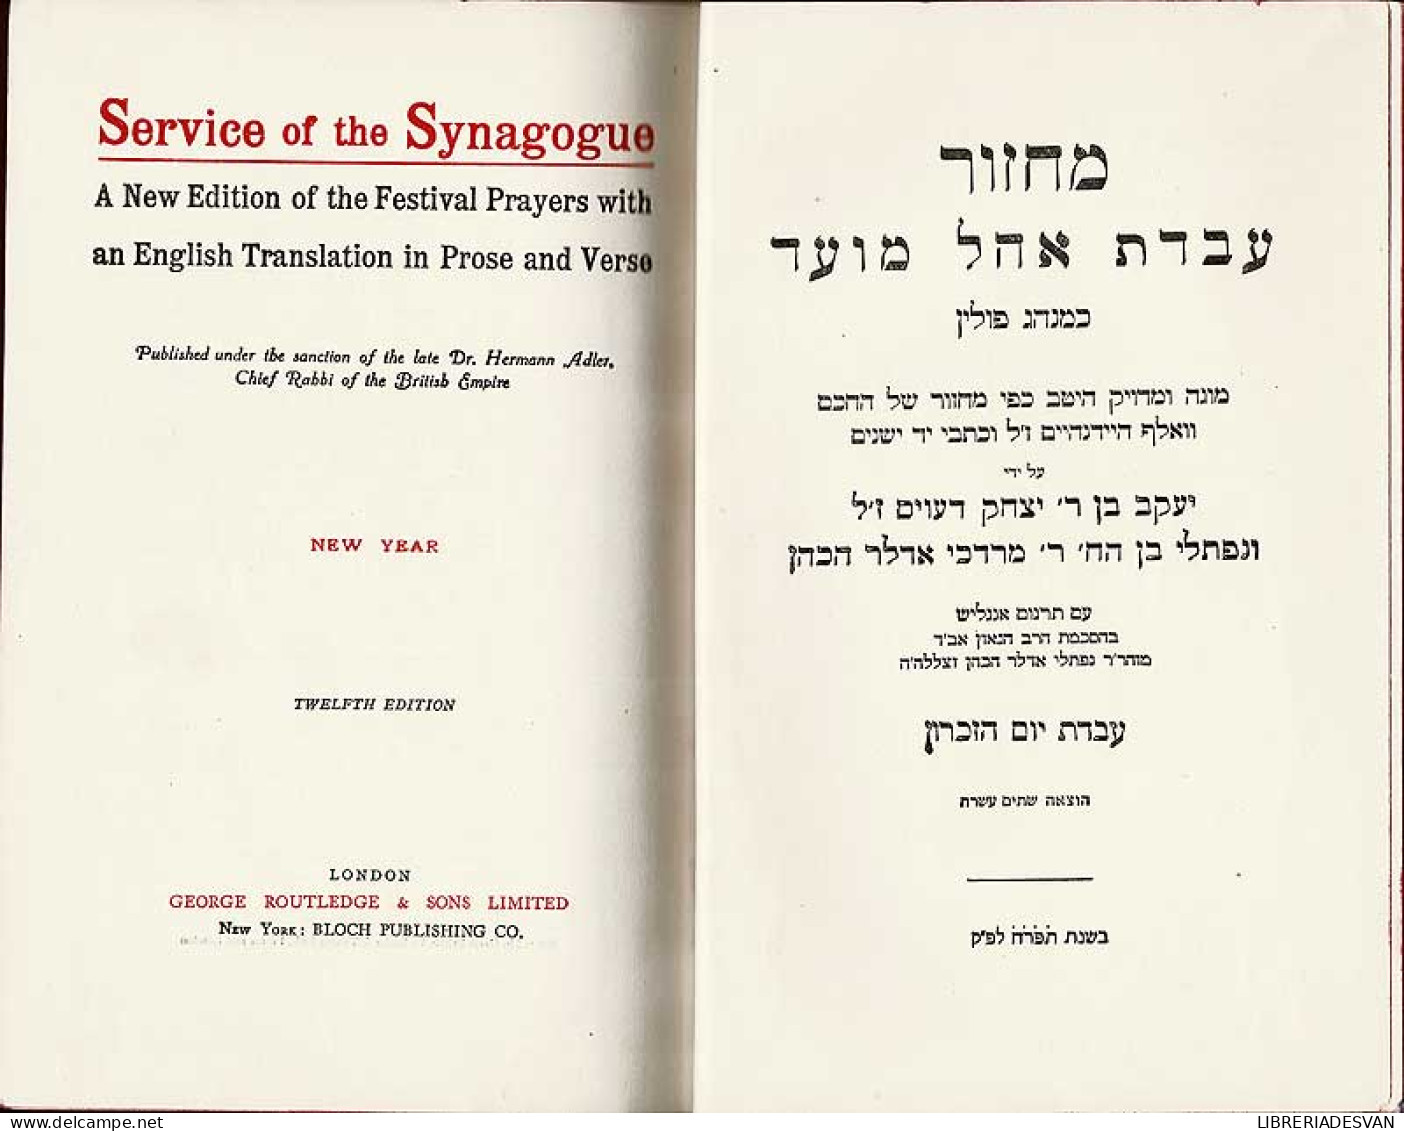 Service Of The Synagogue. New Year 1970-5731 - Jordanie